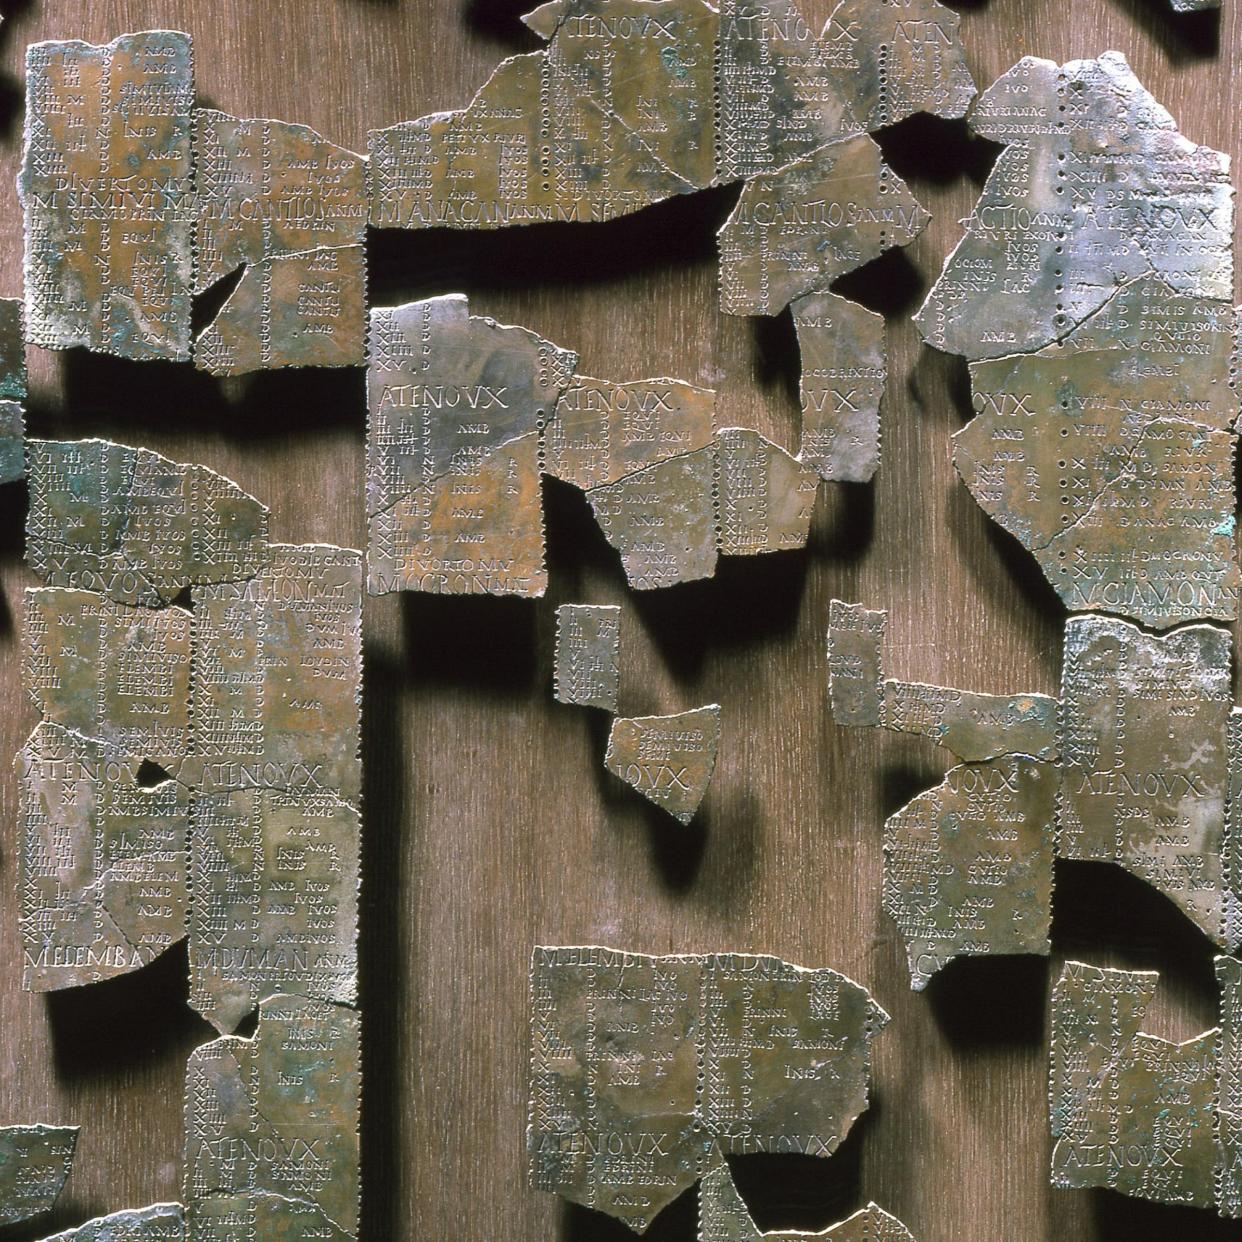 Fragments of the Coligny calendar from ancient Gaul (2nd century CE) now on display in the Gallo-Roman museum in Lyon, France.